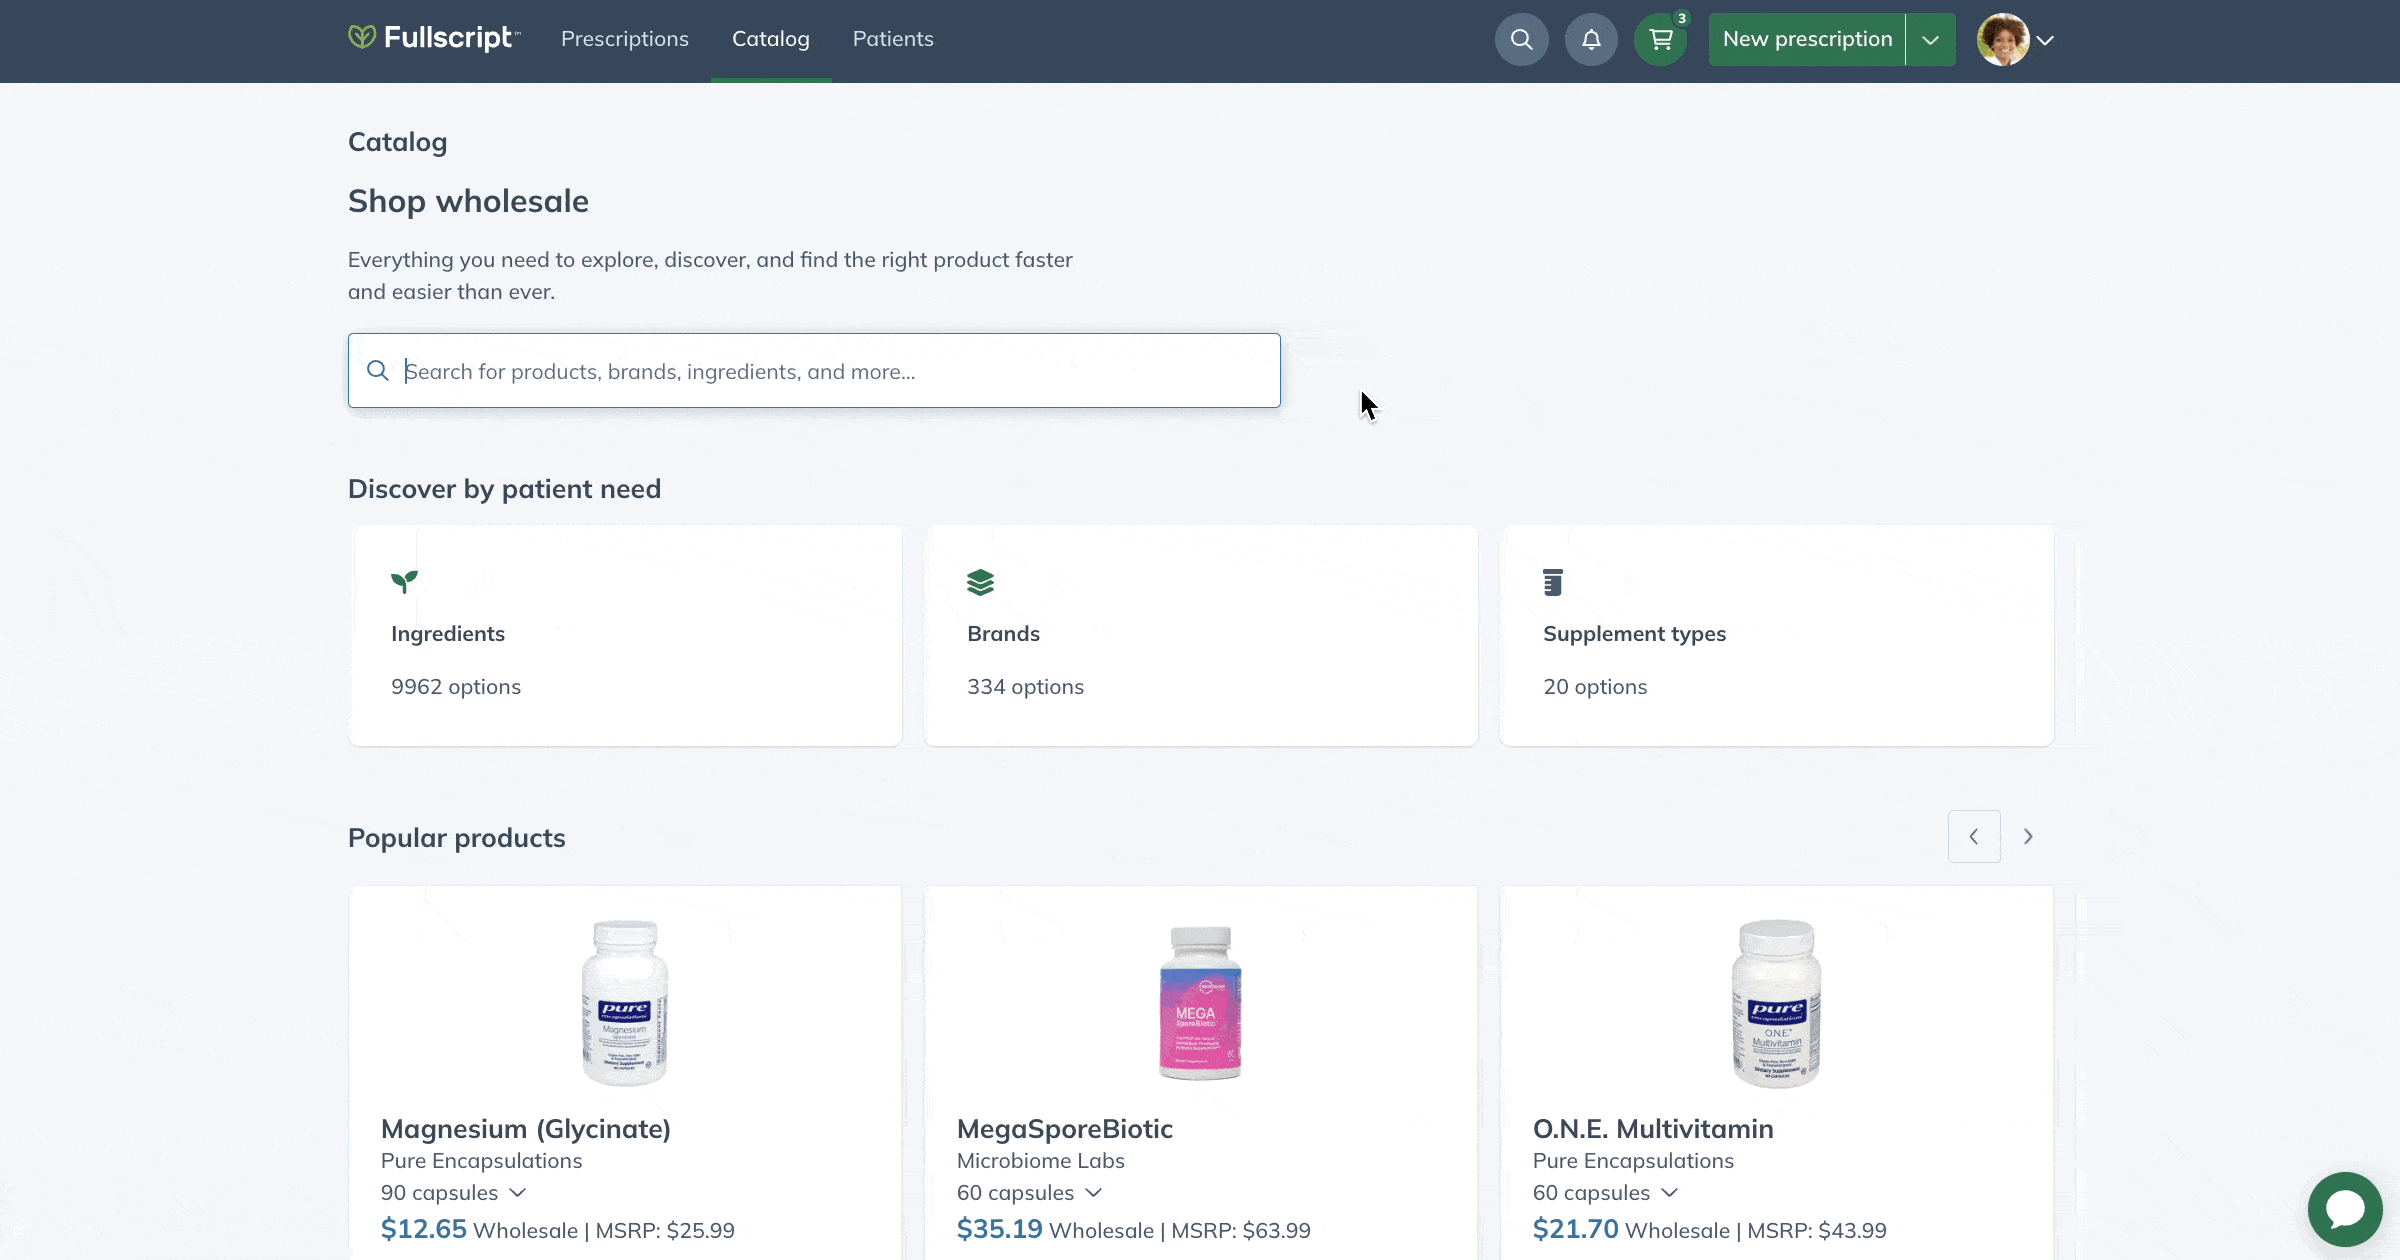 embeddable product cards